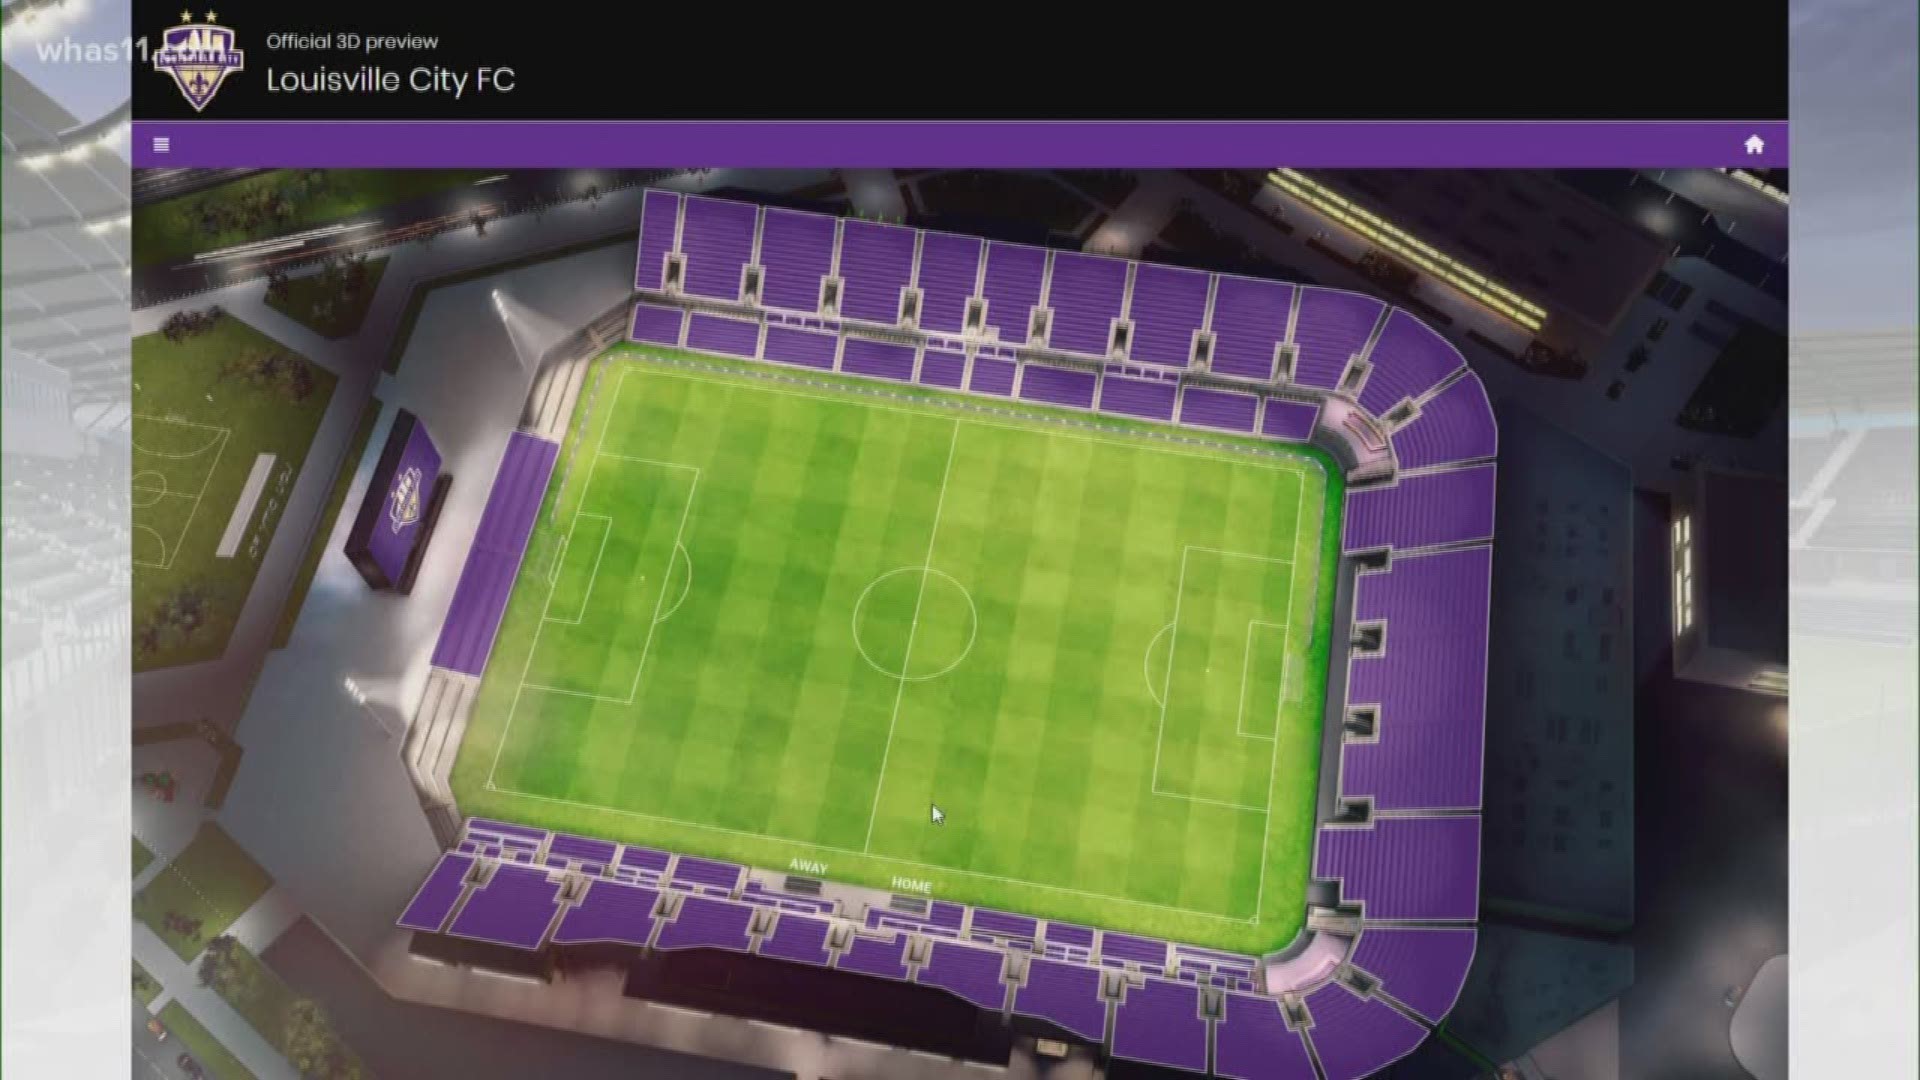 Check out the Louisville City FC website to get a sneak preview of the view from your seat before you buy tickets.